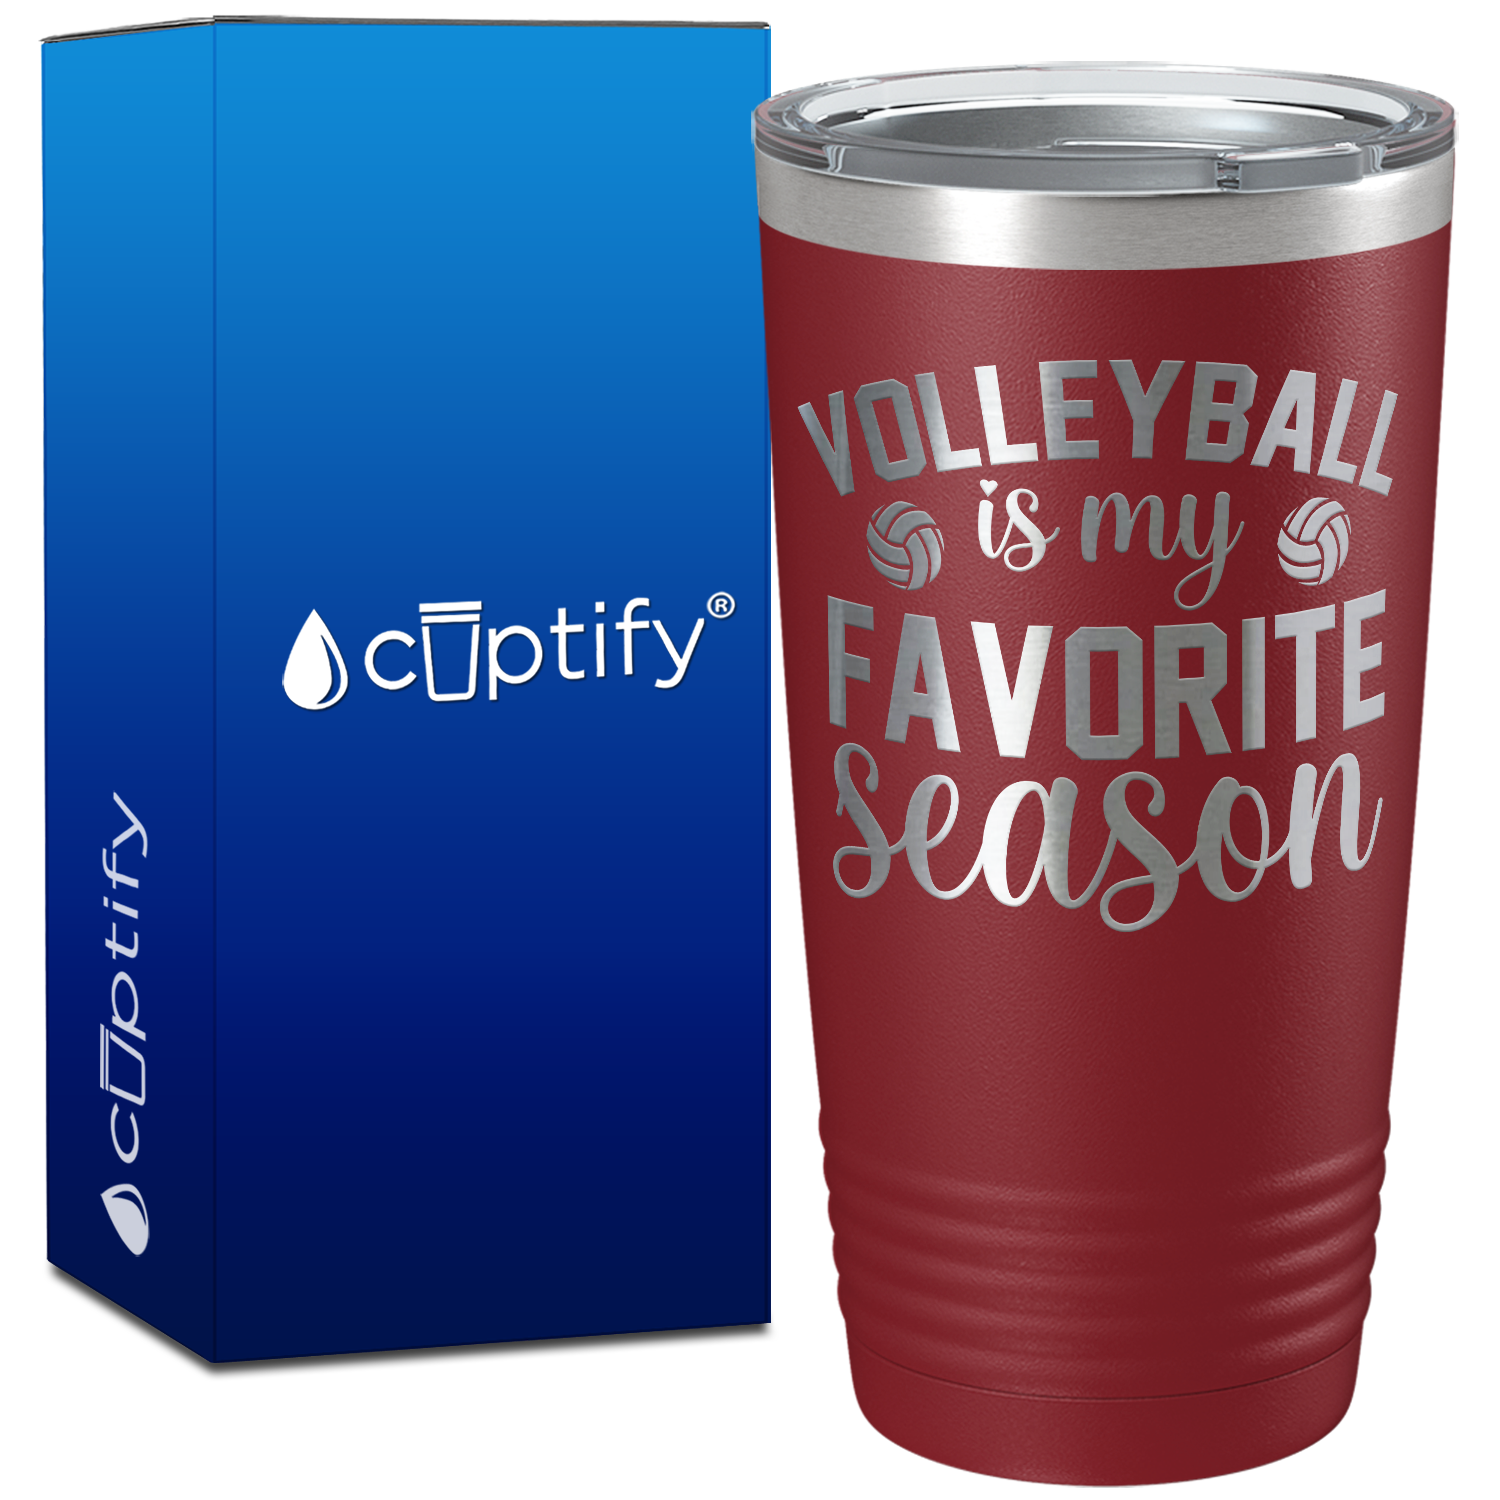 Volleyball is my Favorite Season on 20oz Volleyball Tumbler